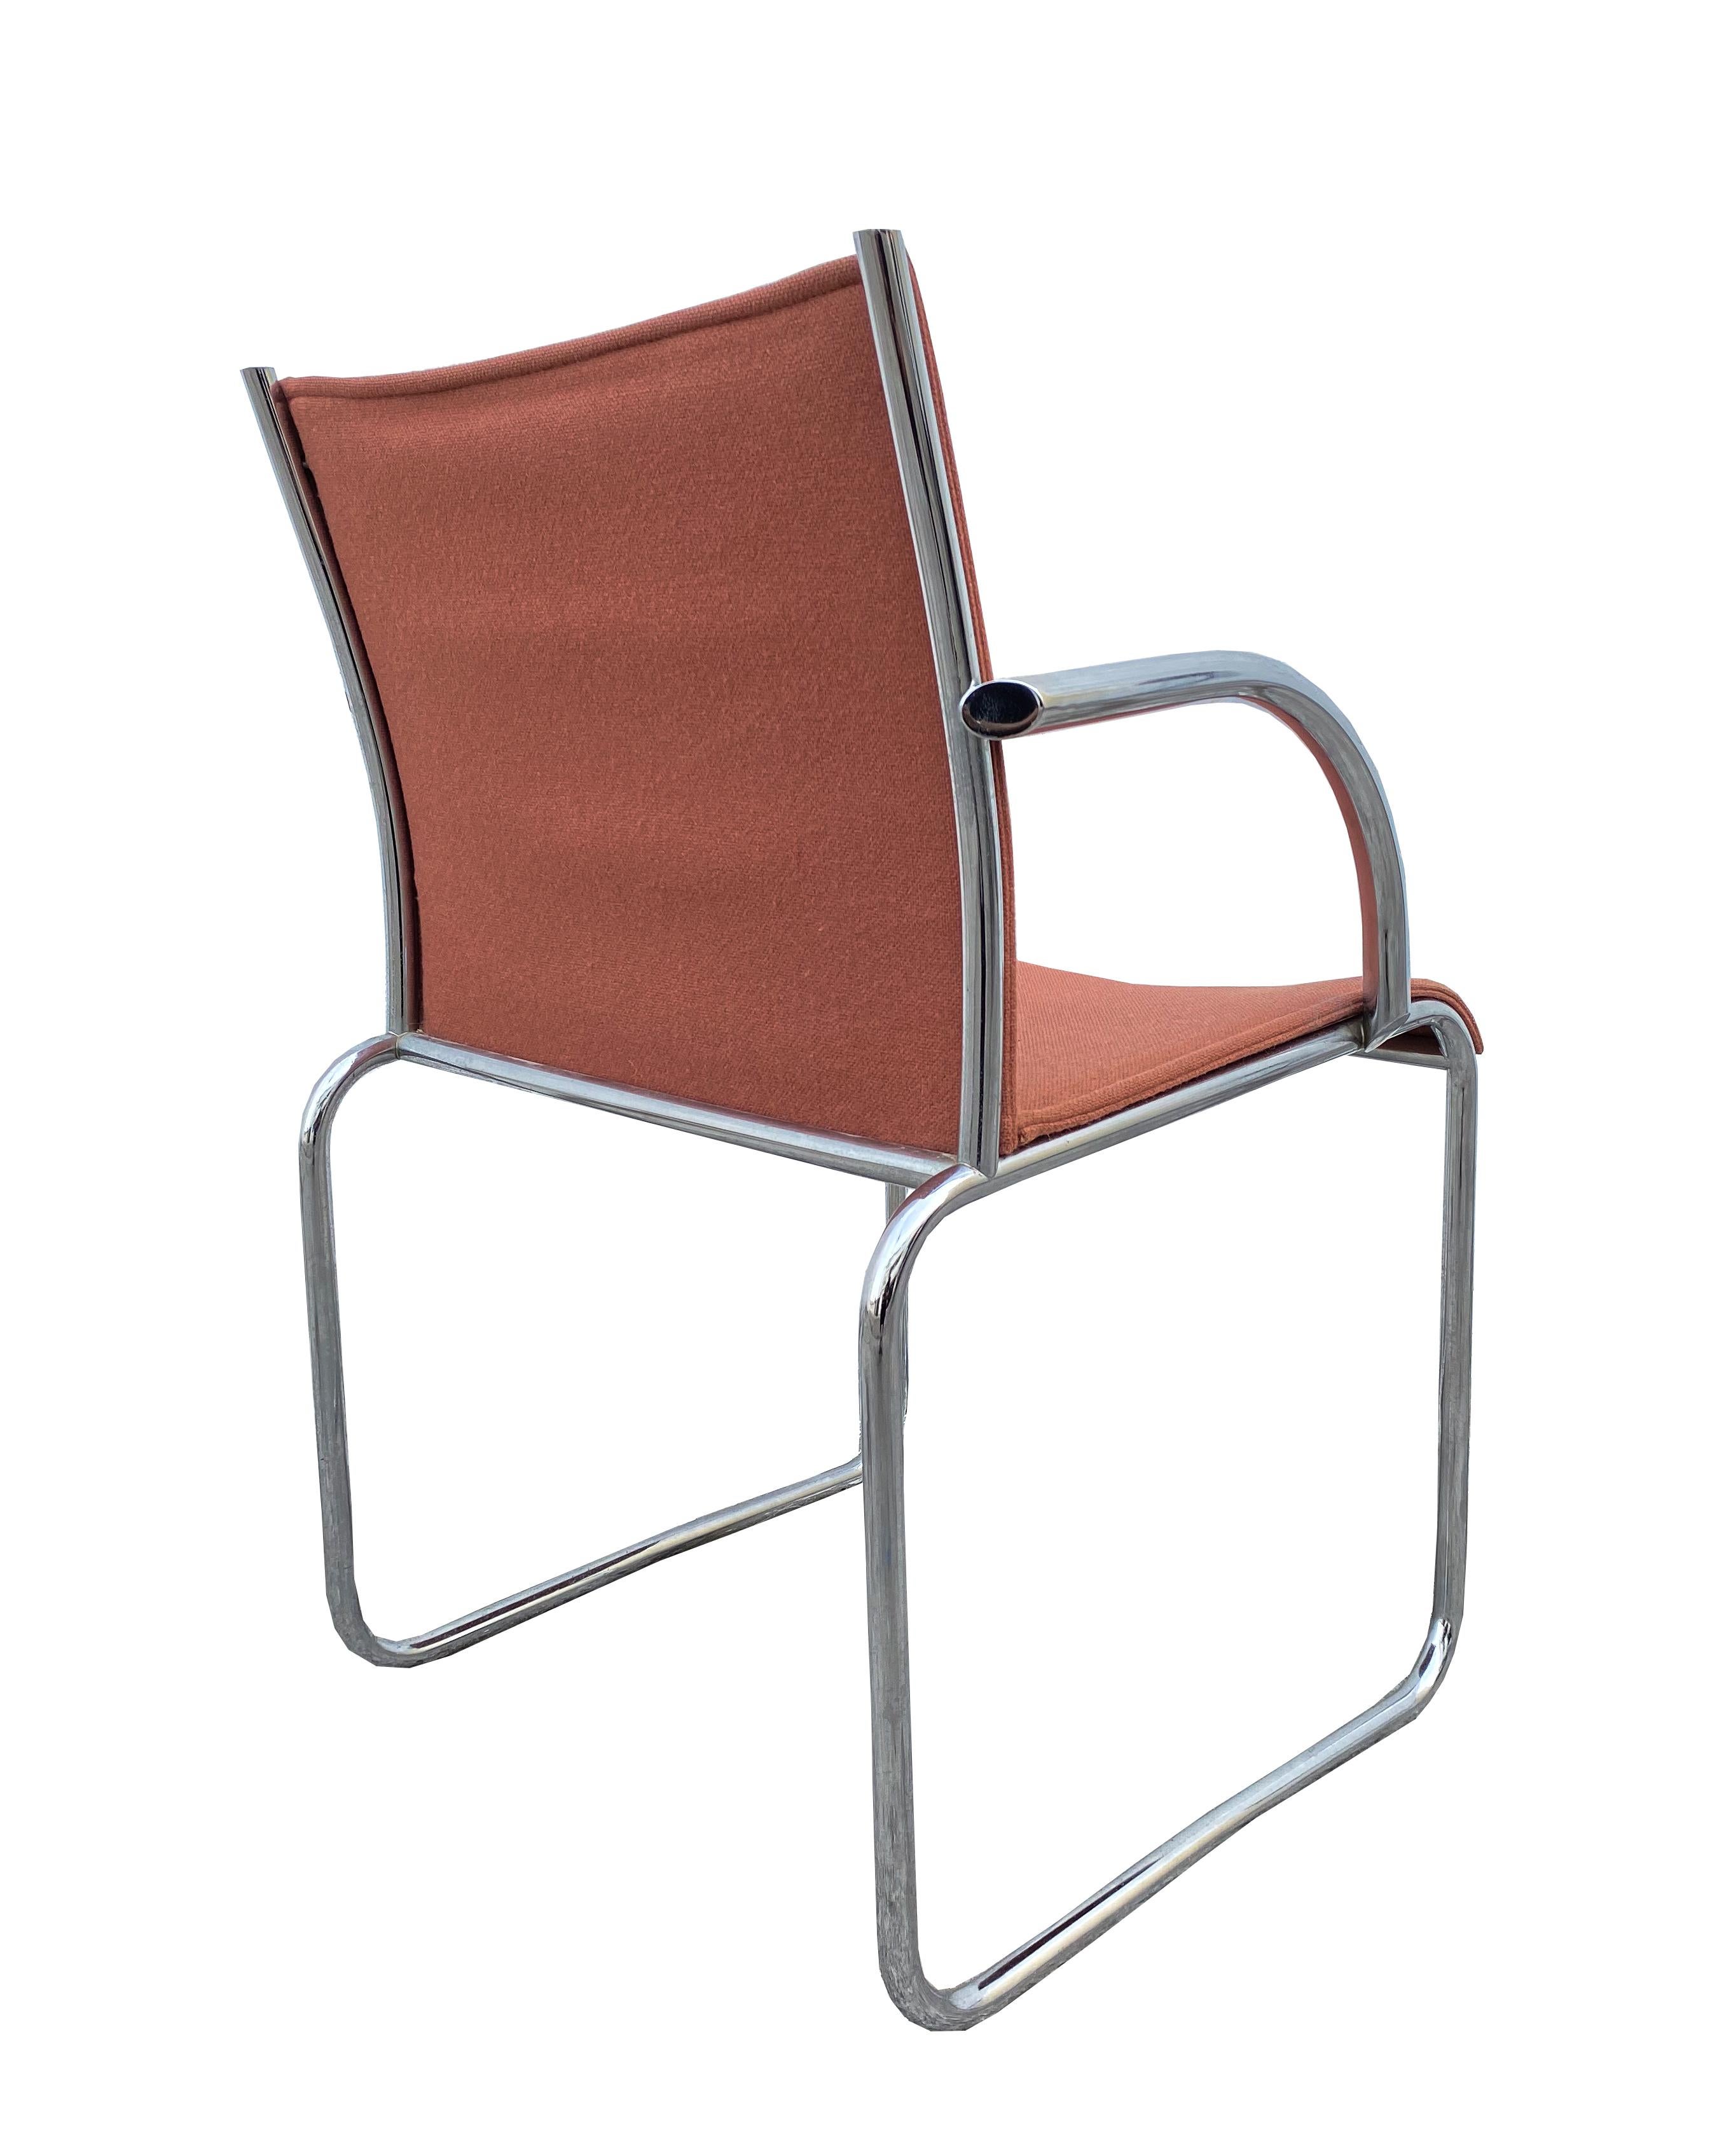 American Knoll 1407 Chair by Richard Schultz For Sale